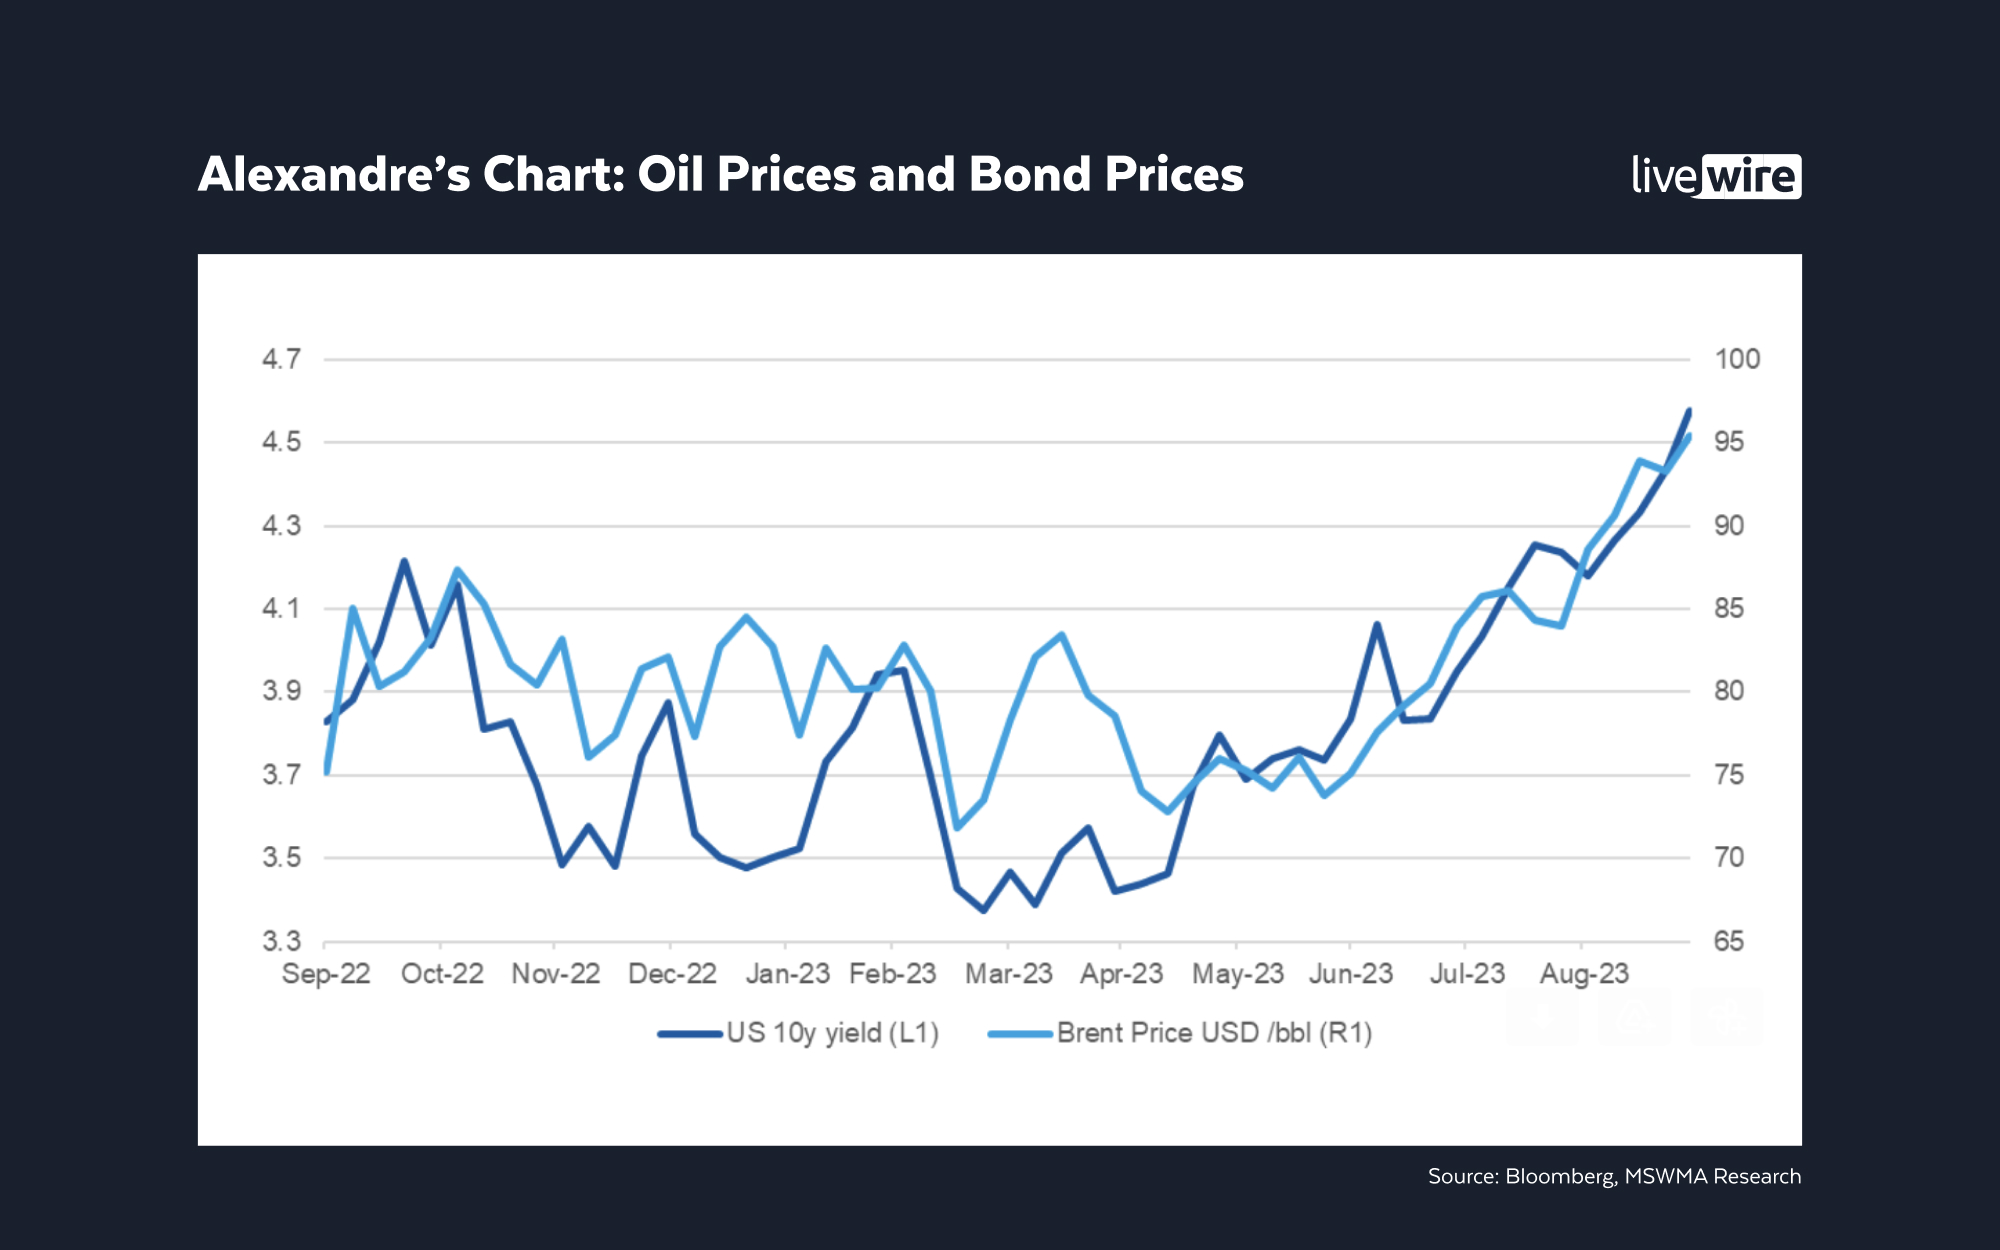 Alexandres Chart - Oil Prices and Bond Prices